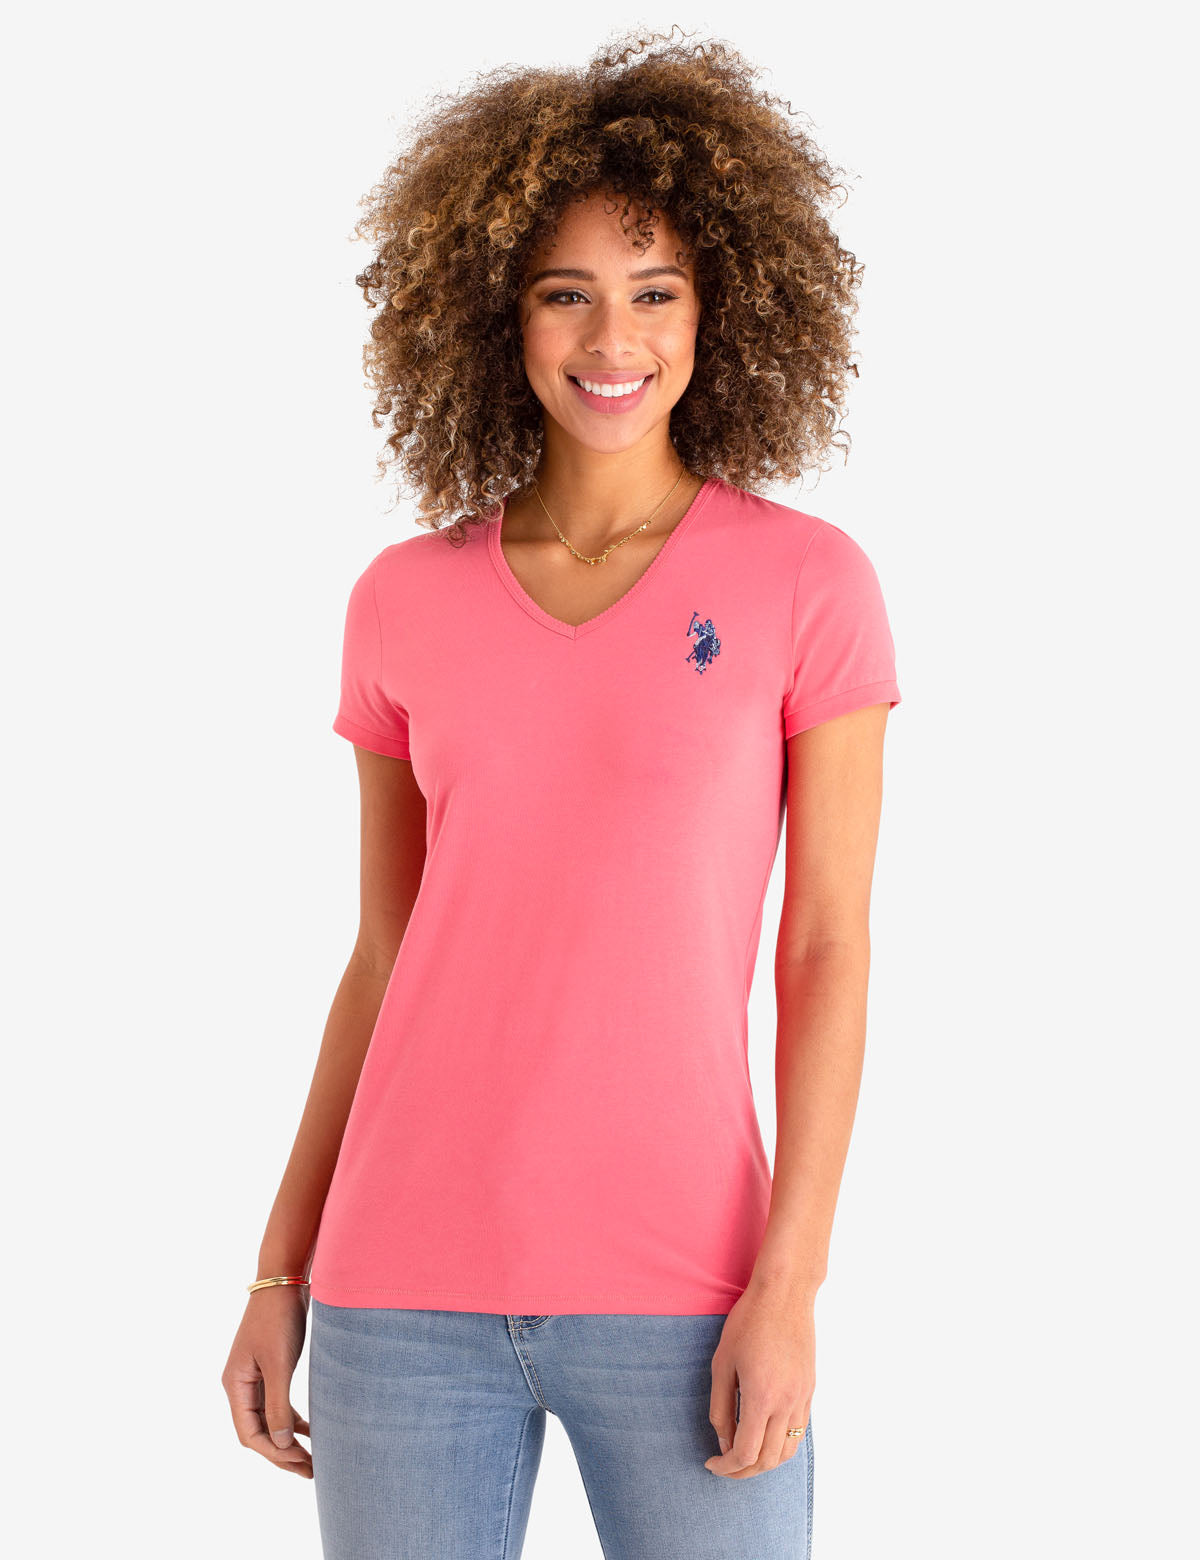 pink polo shirts for women